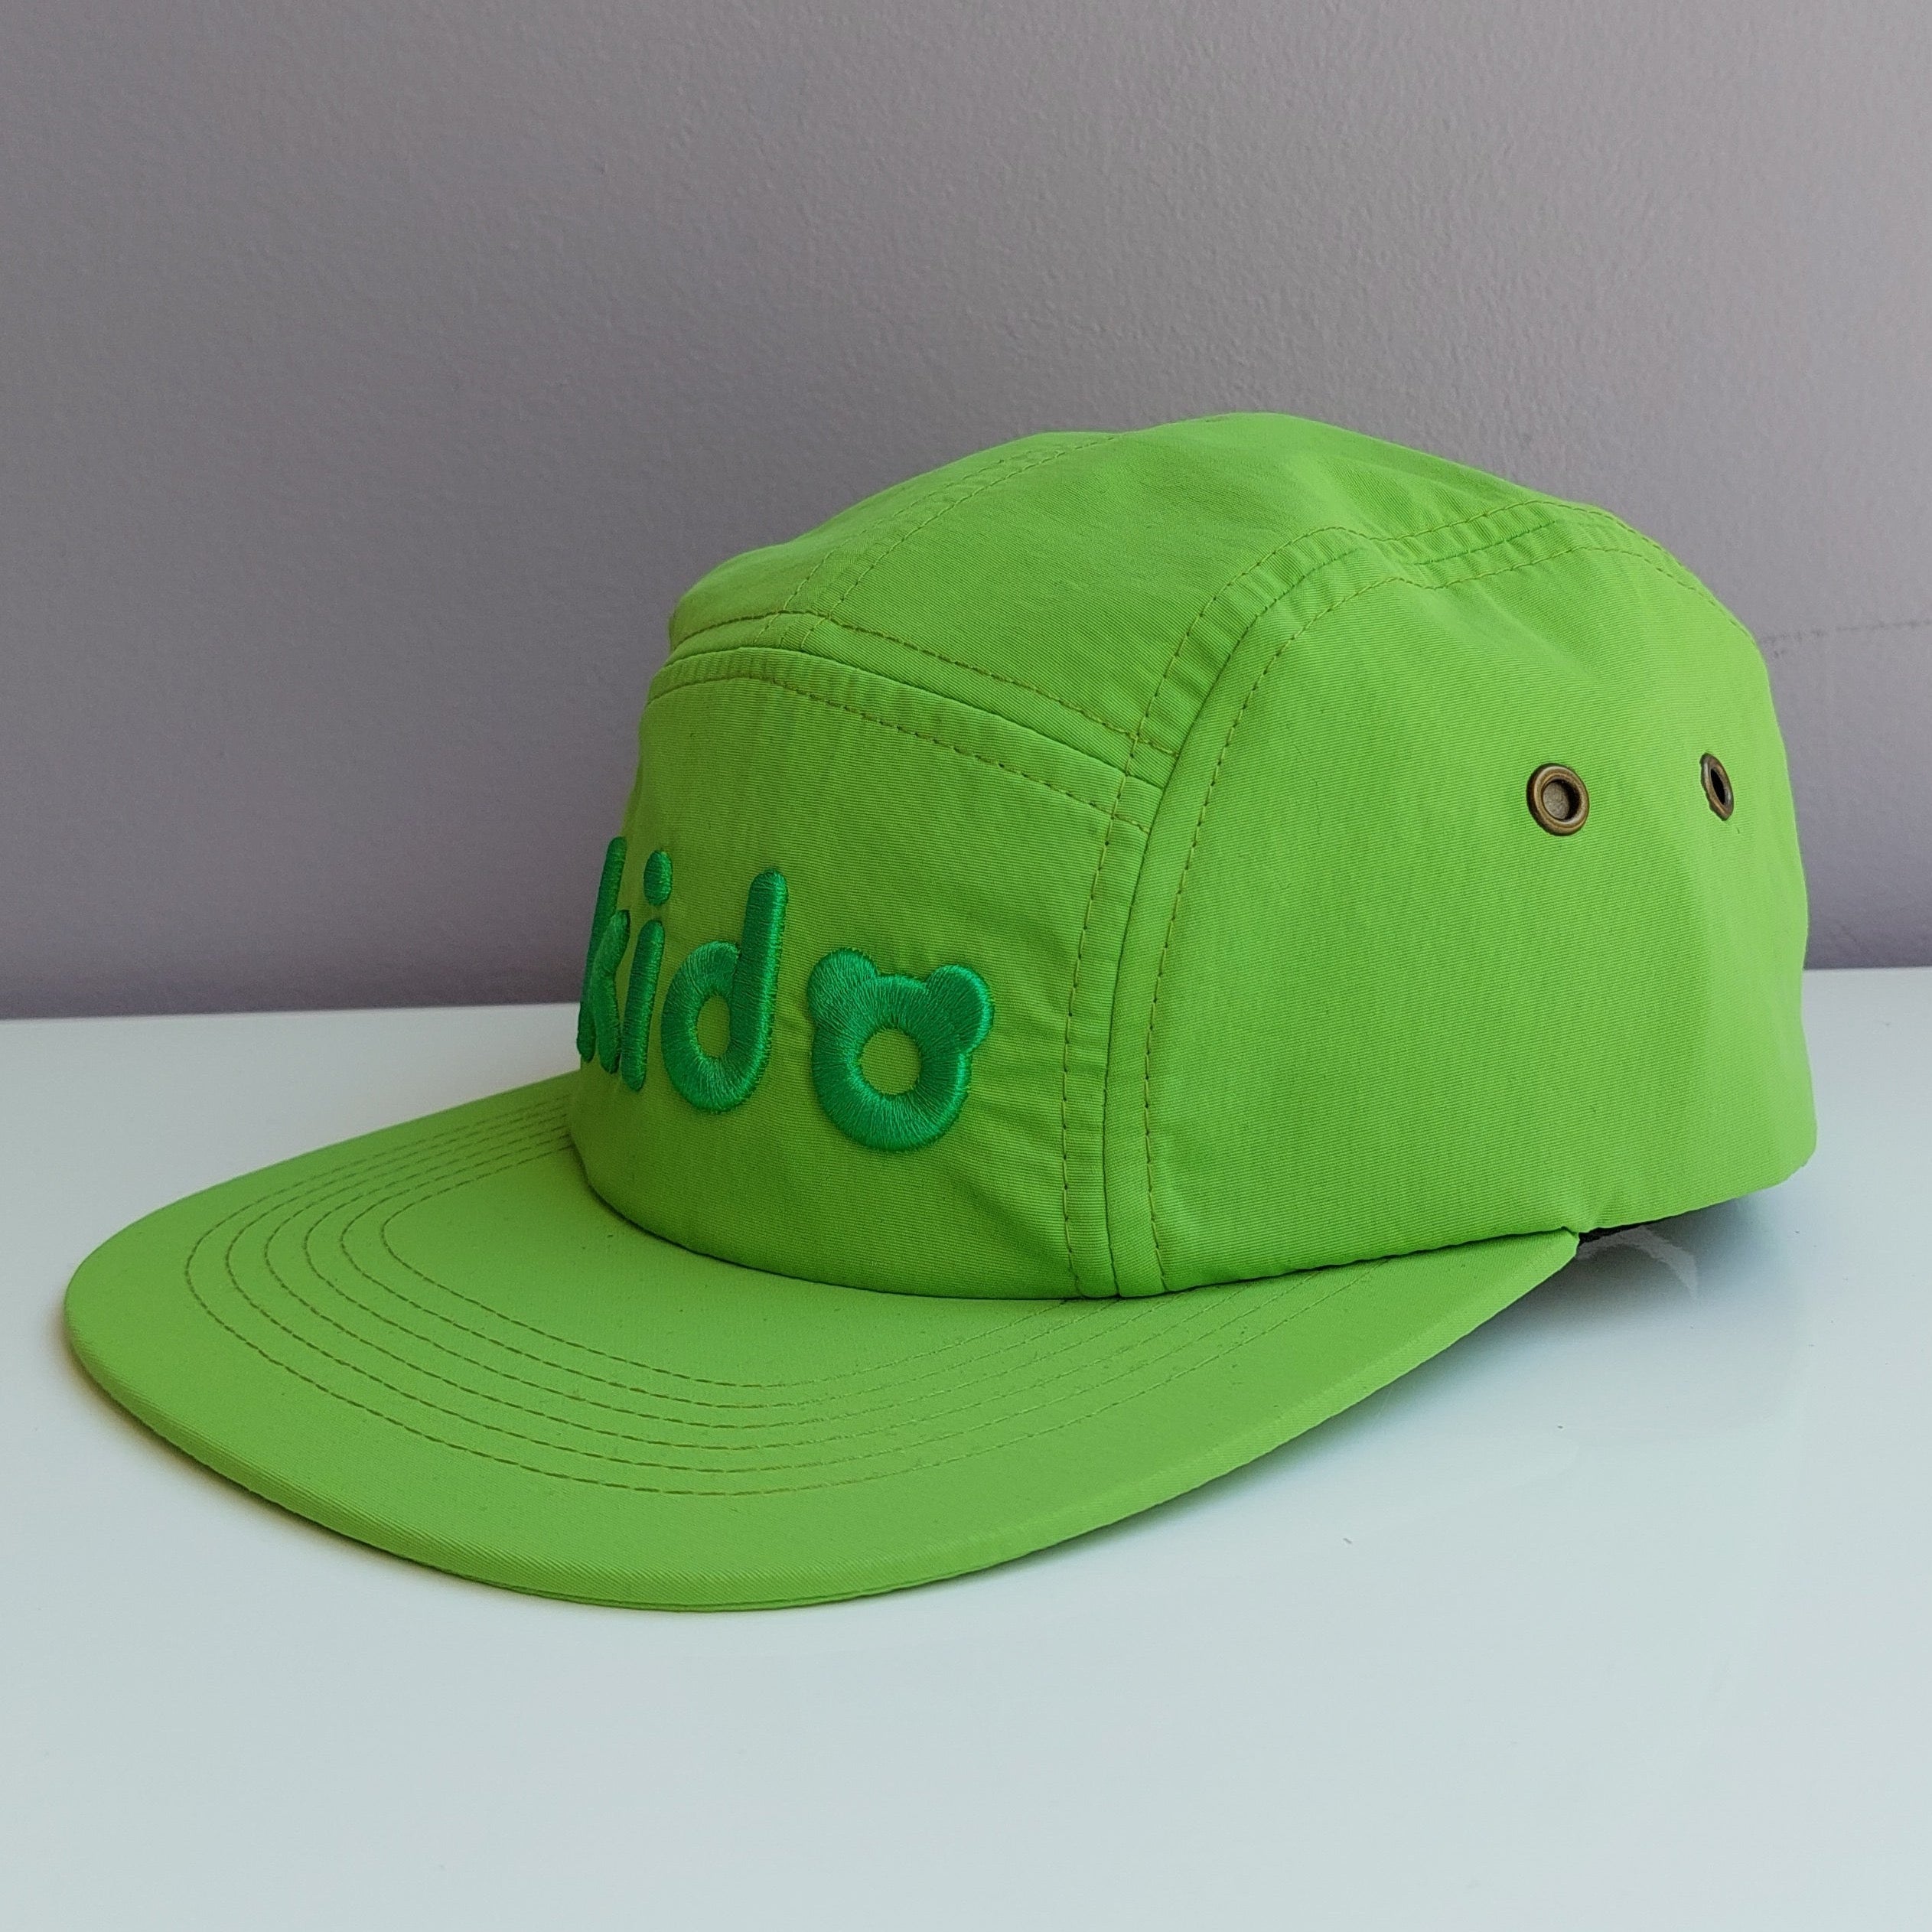 A bright green 5 panel cap turned at a 45 degree angle sits on a white surface with a light purple background. The Kido logo is visible across the front in darker green embroidery.